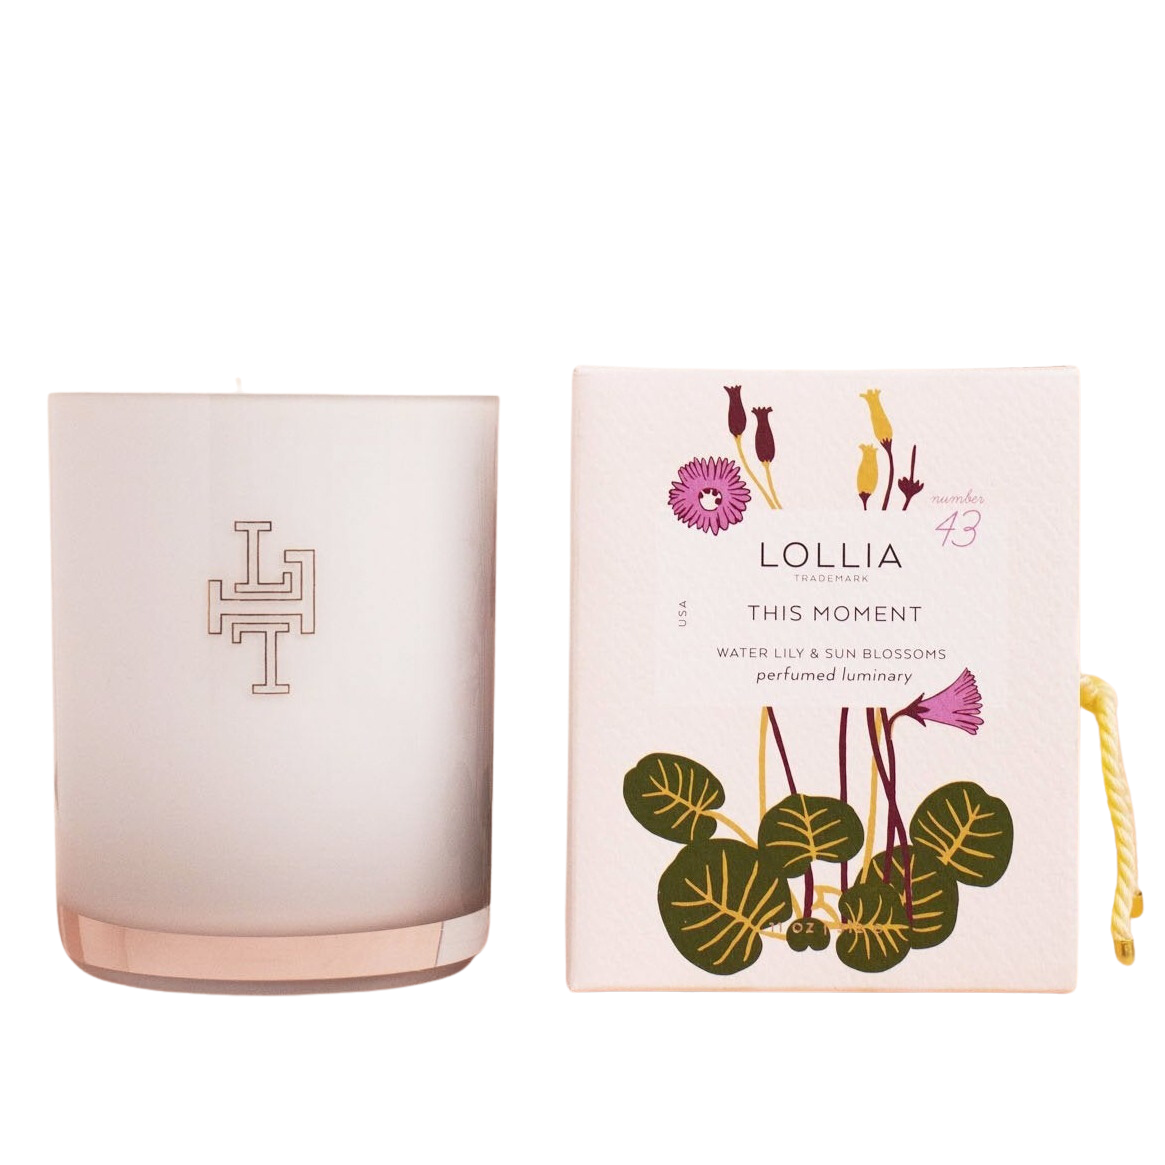 Lollia "This Moment" Candle